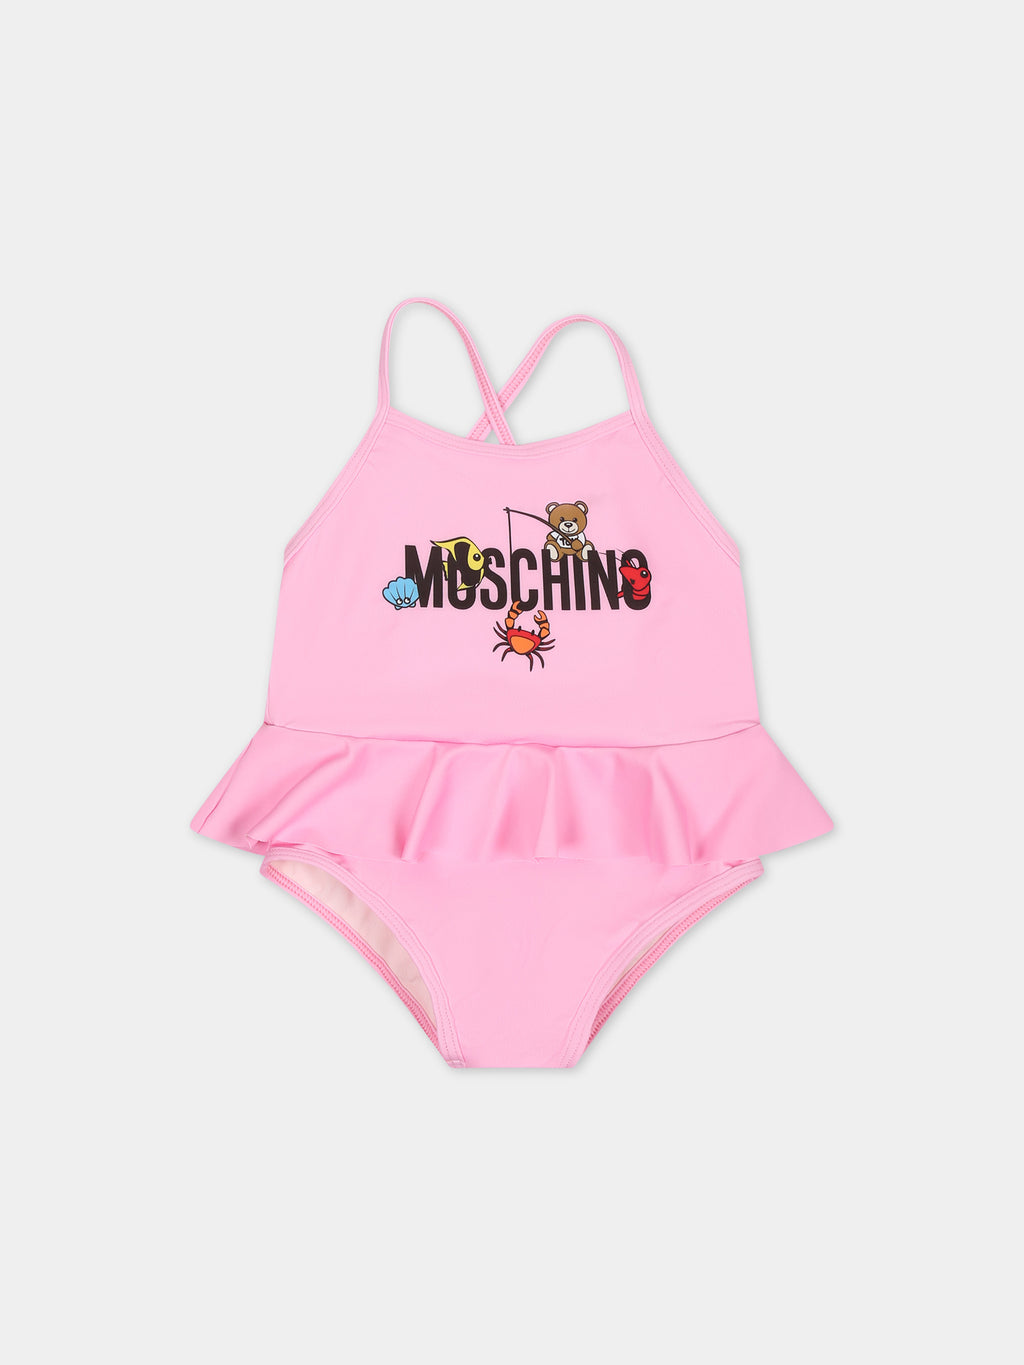 Pink one piece swimsuit for baby girl with logo